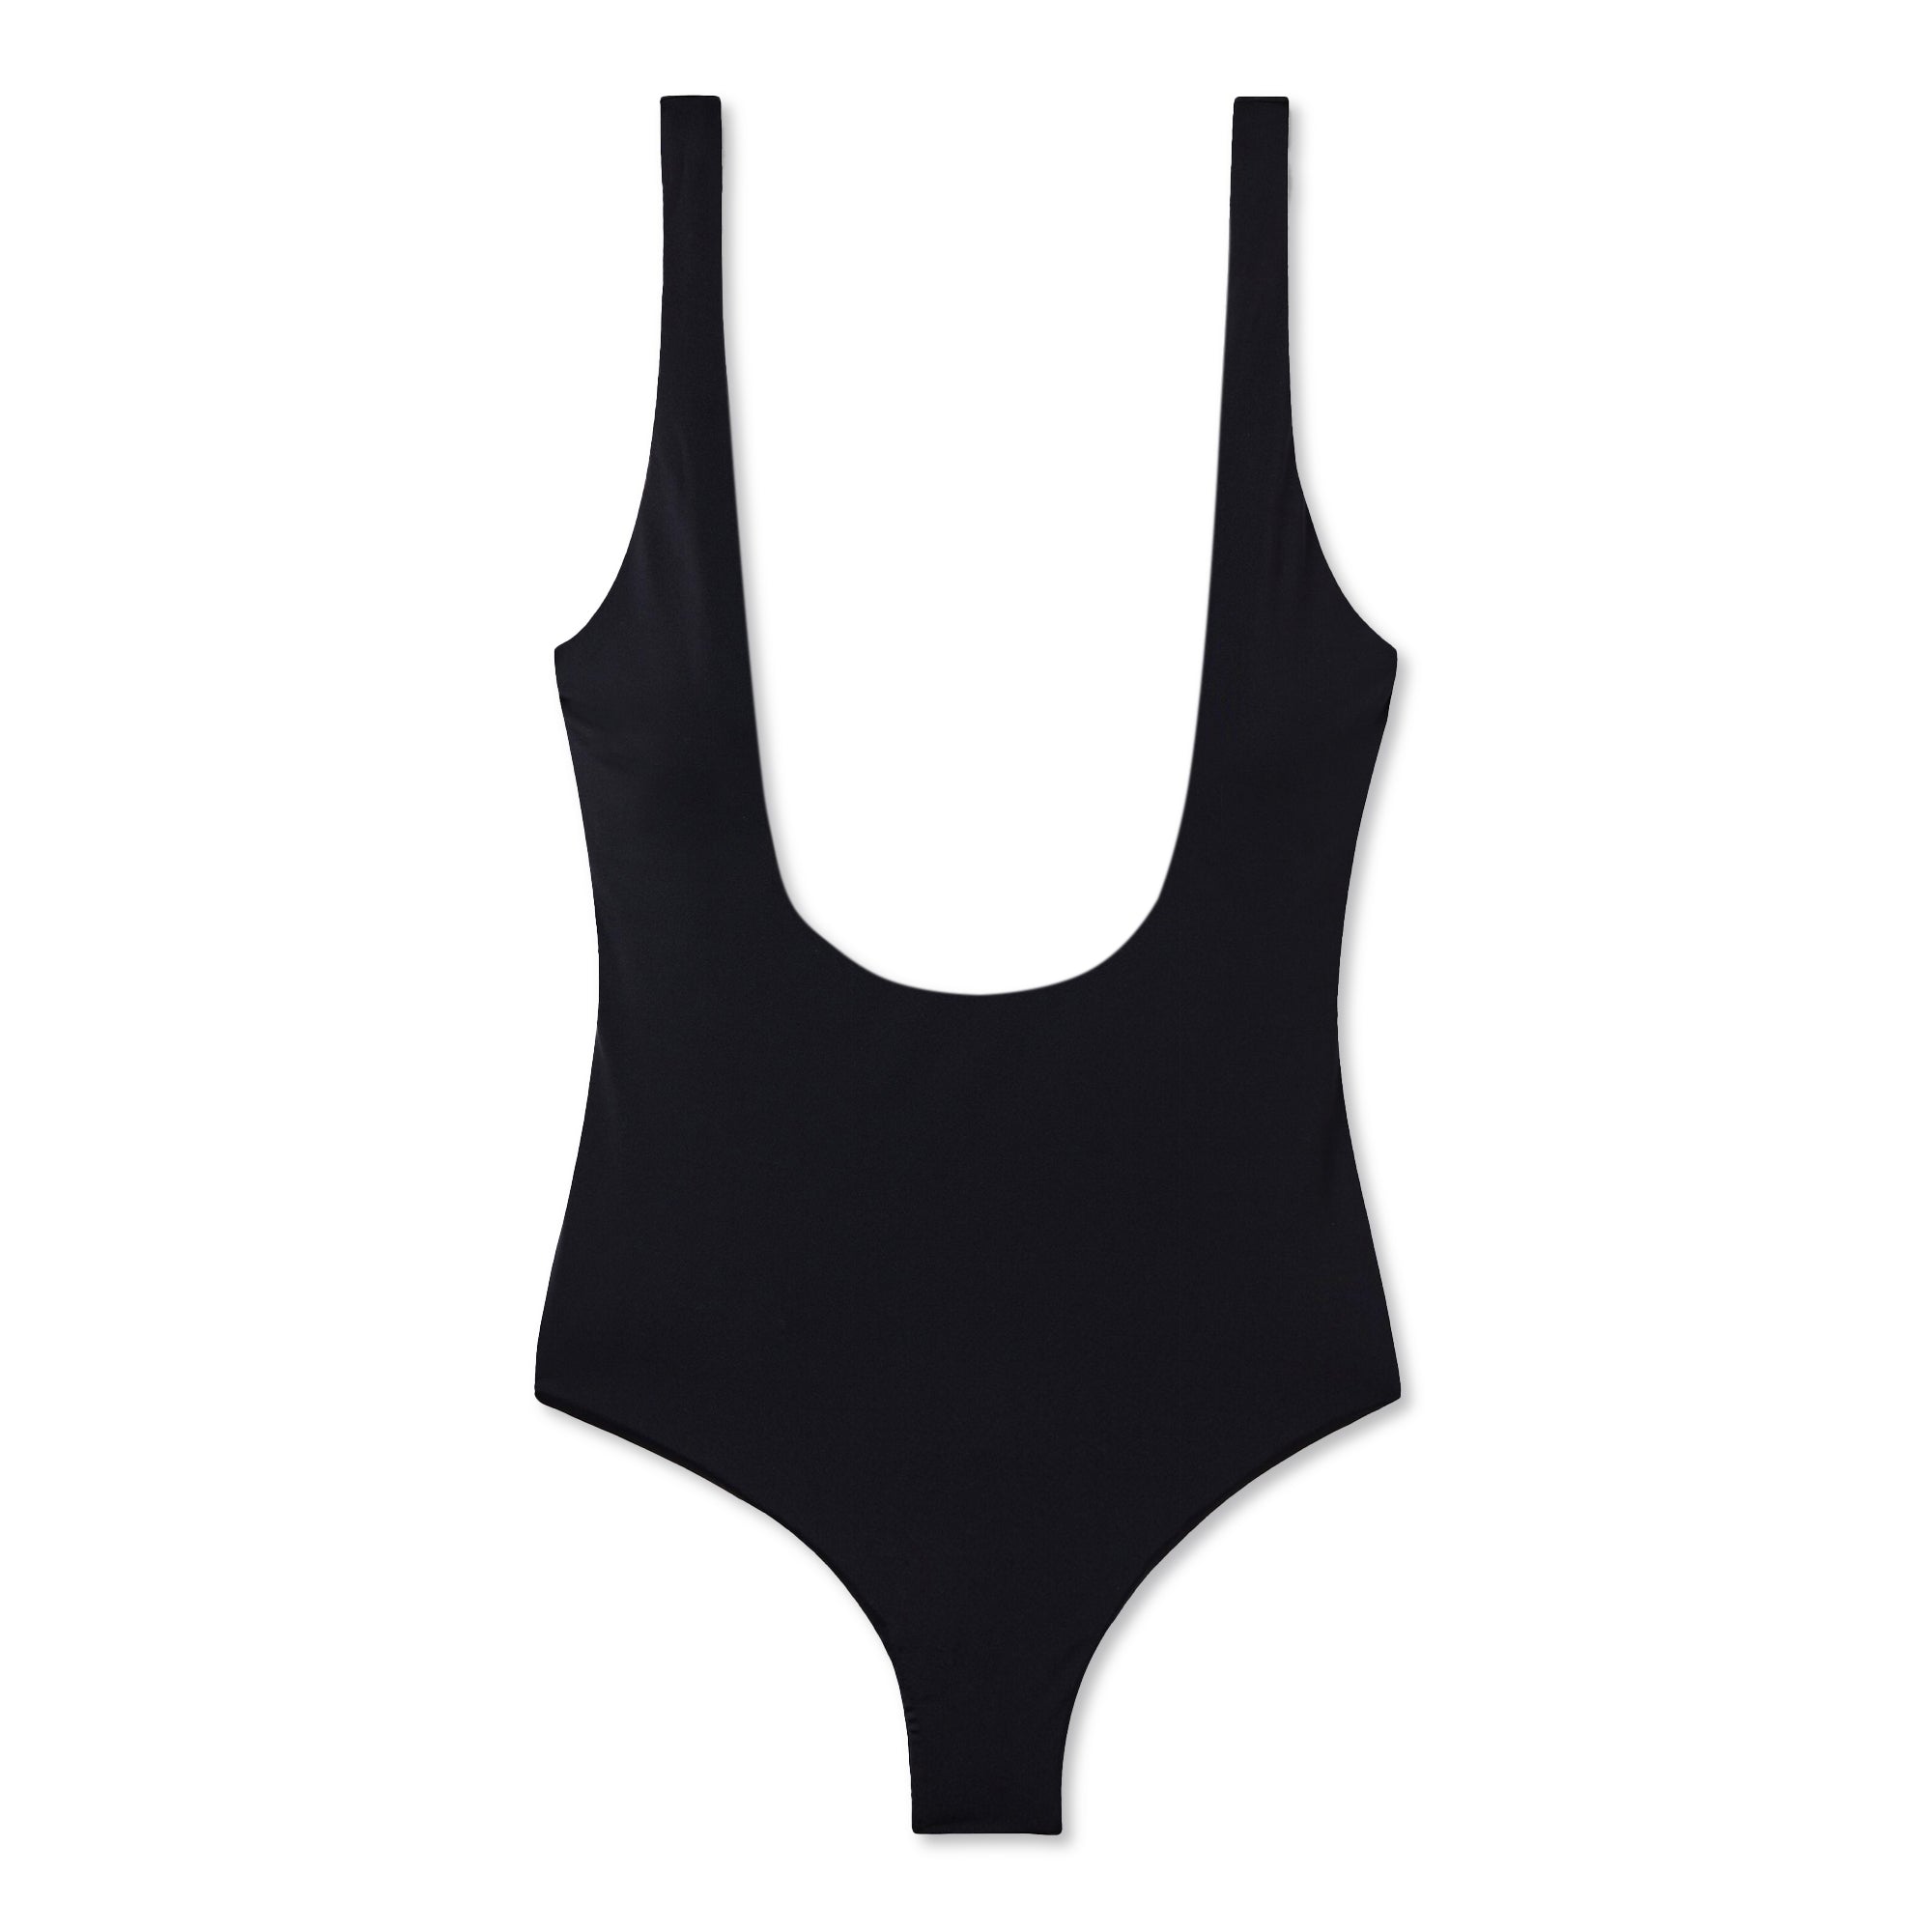 ROUGHNESS SWIMSUIT - BLACK